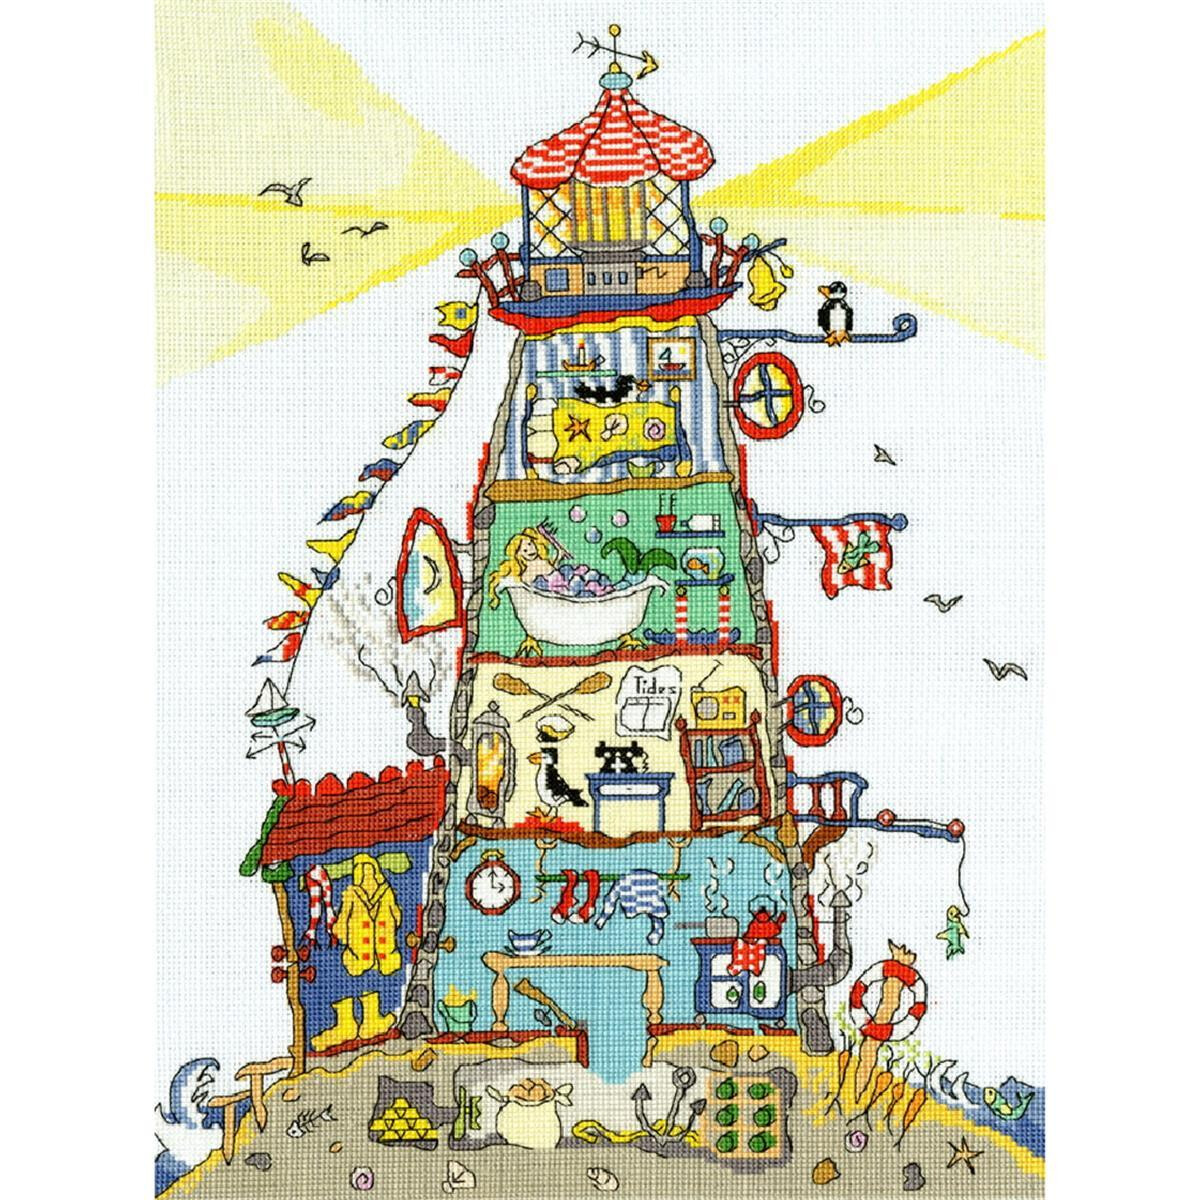 An embroidery artwork of a whimsical lighthouse shows...